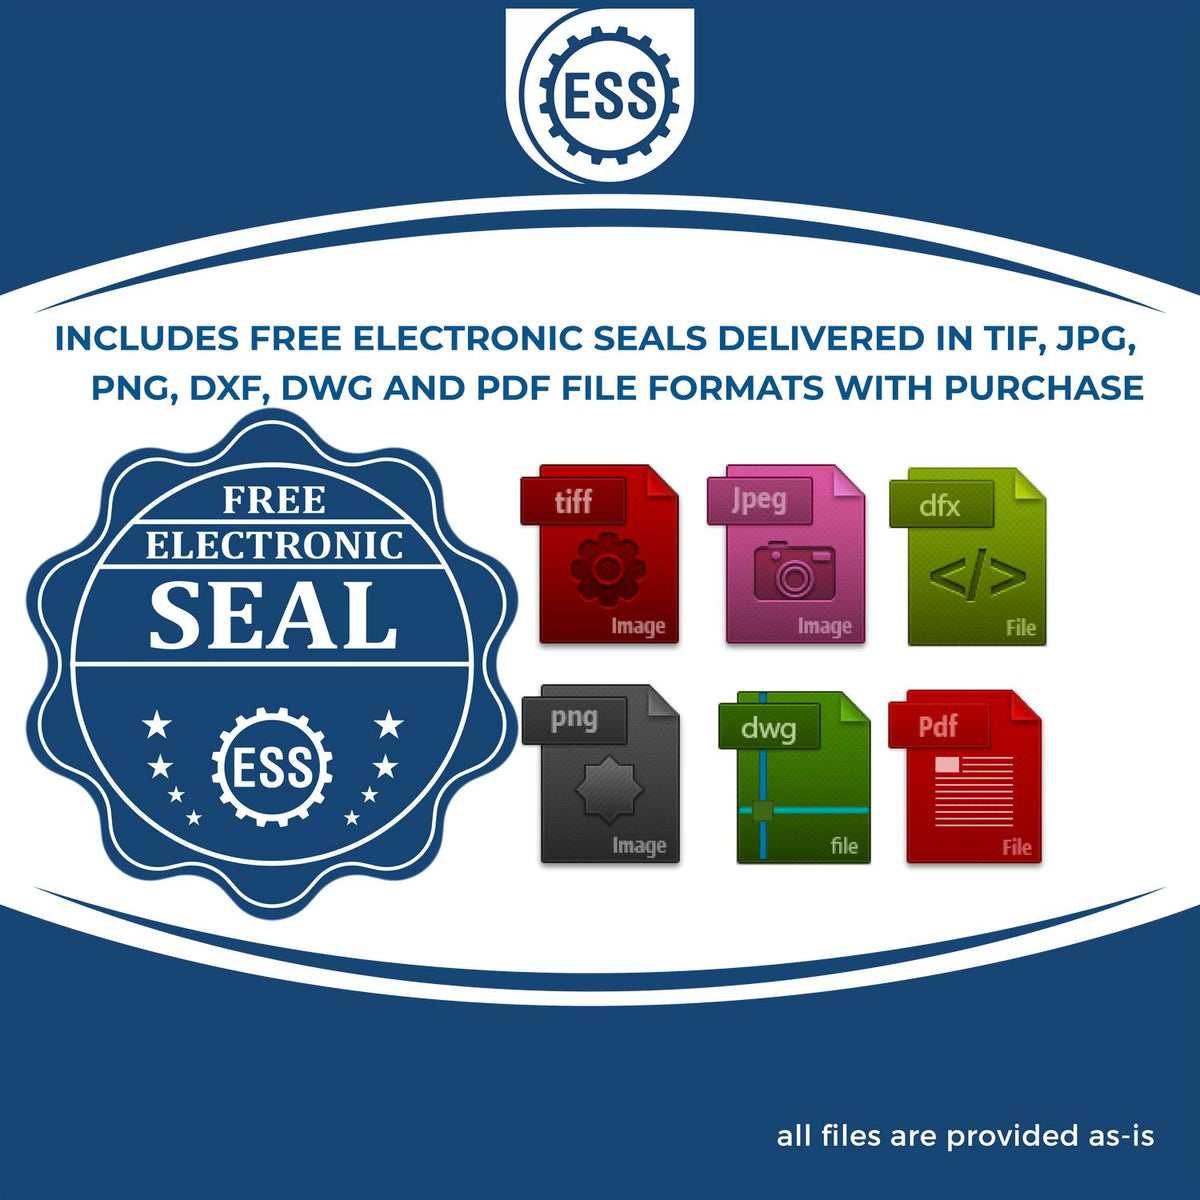 An infographic for the free electronic seal for the Long Reach Hawaii PE Seal illustrating the different file type icons such as DXF, DWG, TIF, JPG and PNG.